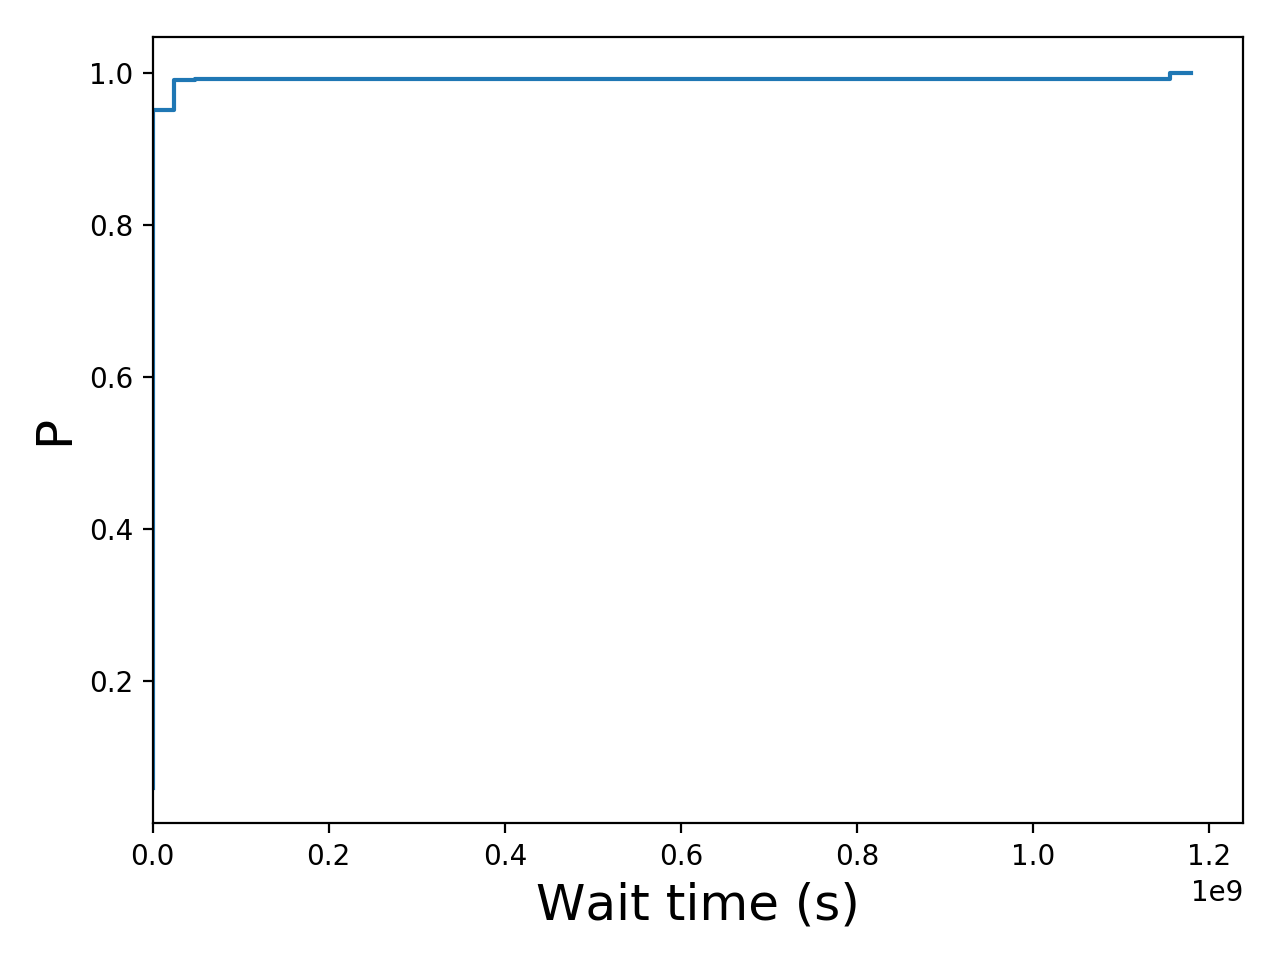 Task wait time CDF graph for the LANL_Trinity trace.